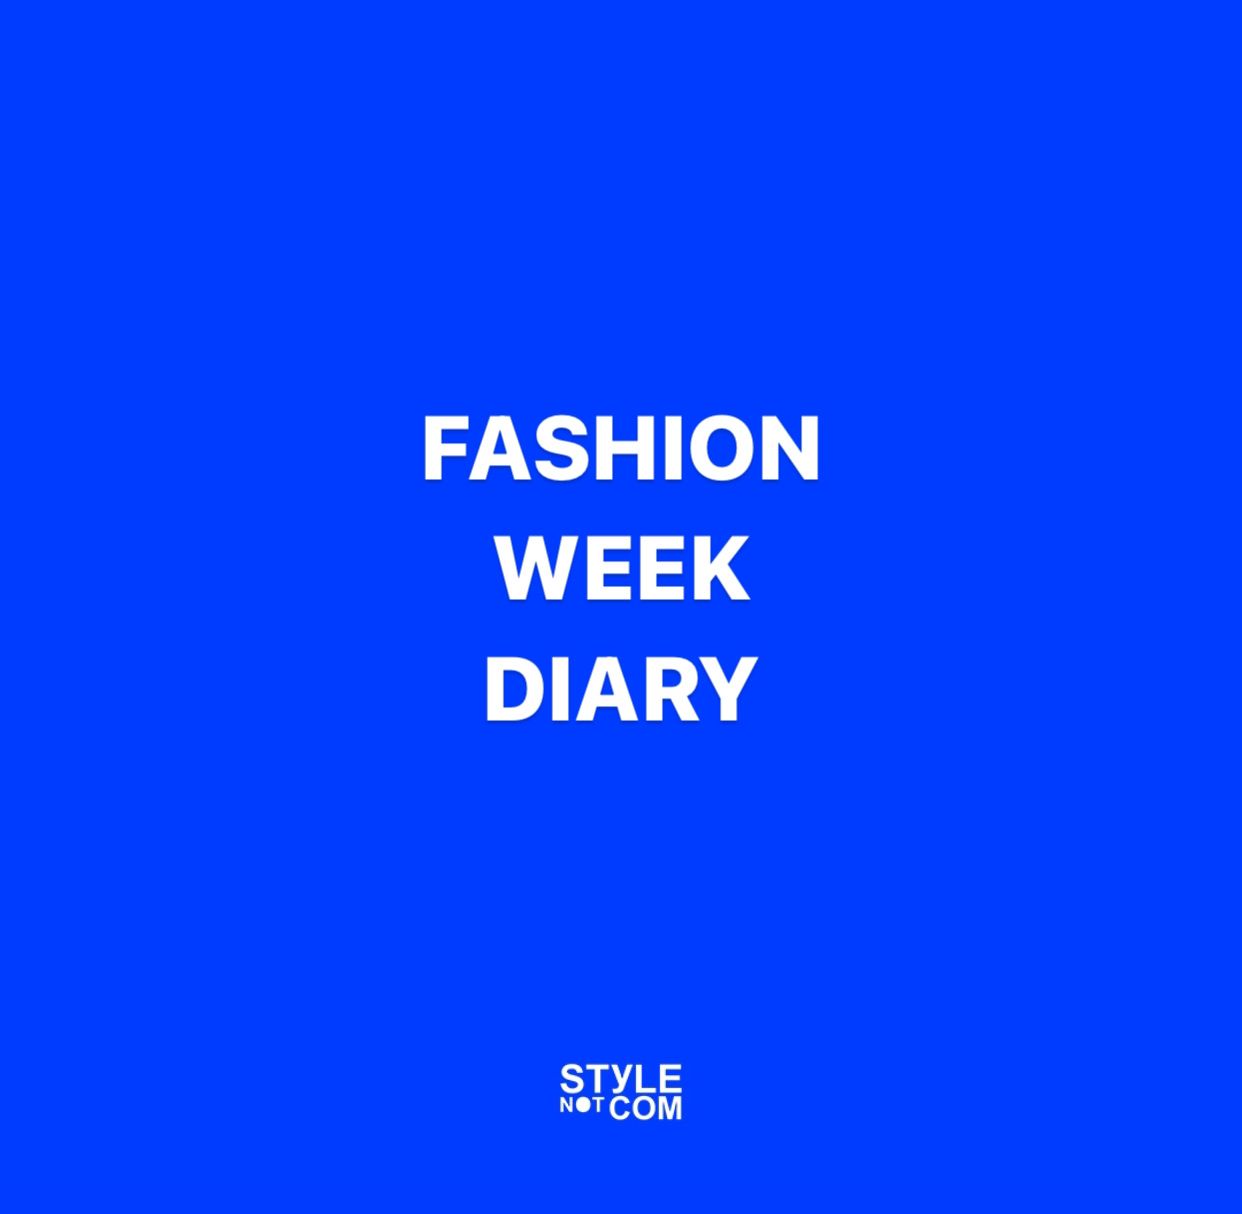 Fashion Week Diary: STYLE NOT COM - System Selects - System Magazine